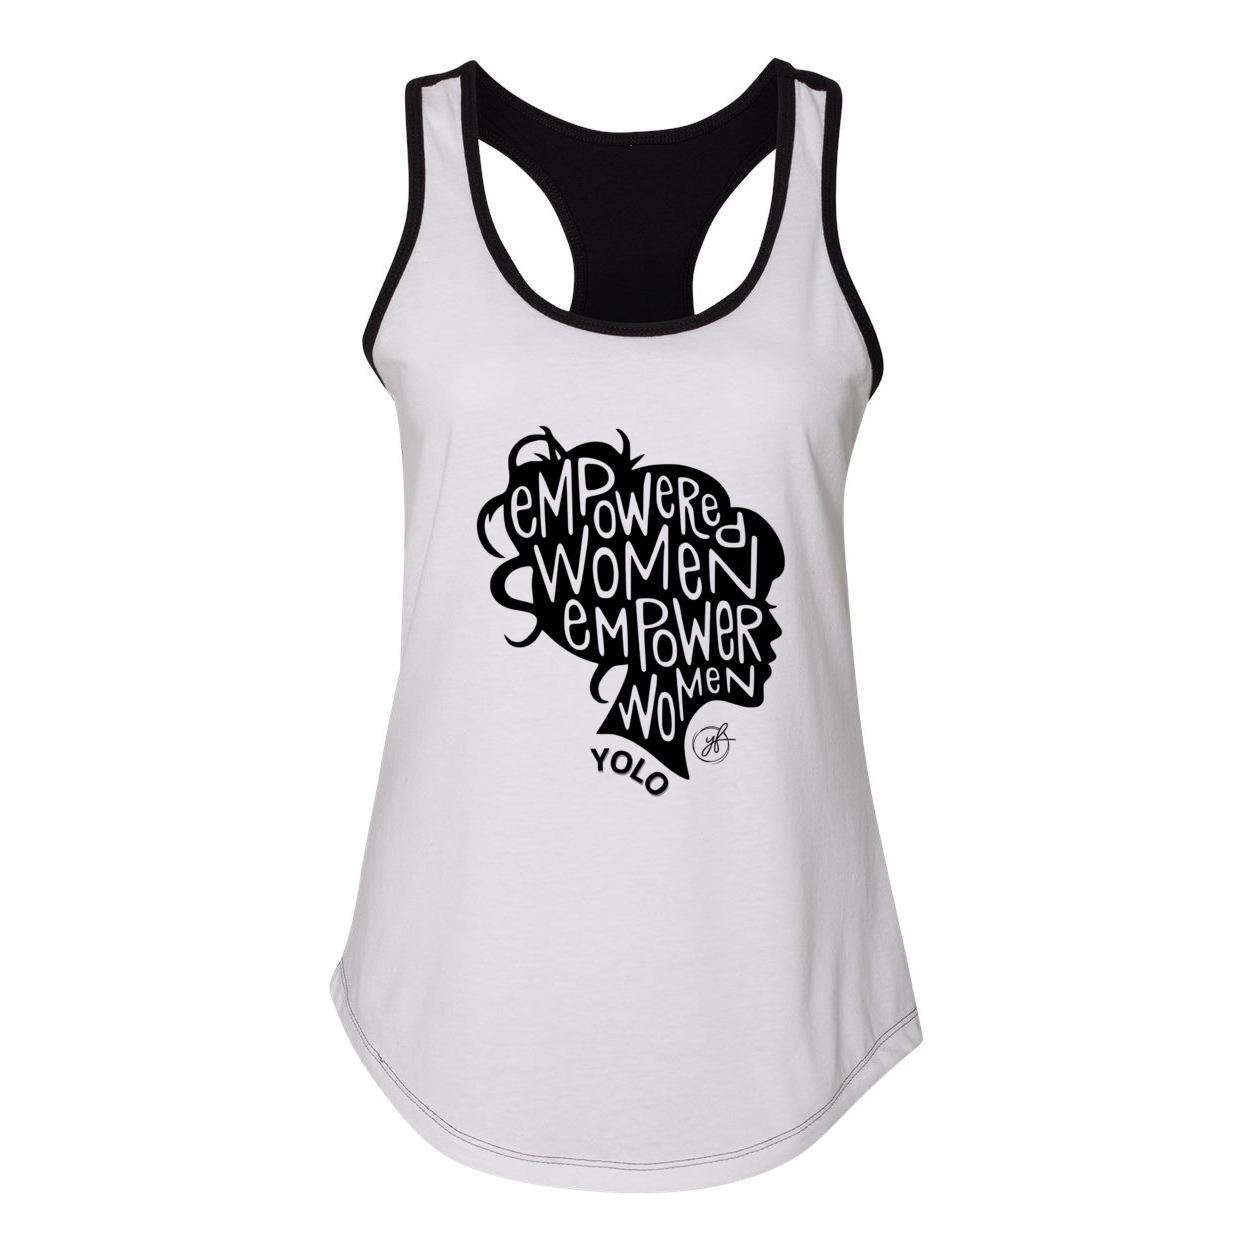 YOLO FITTED'S "EMPOWERED WOMEN" RACER BACK TANK